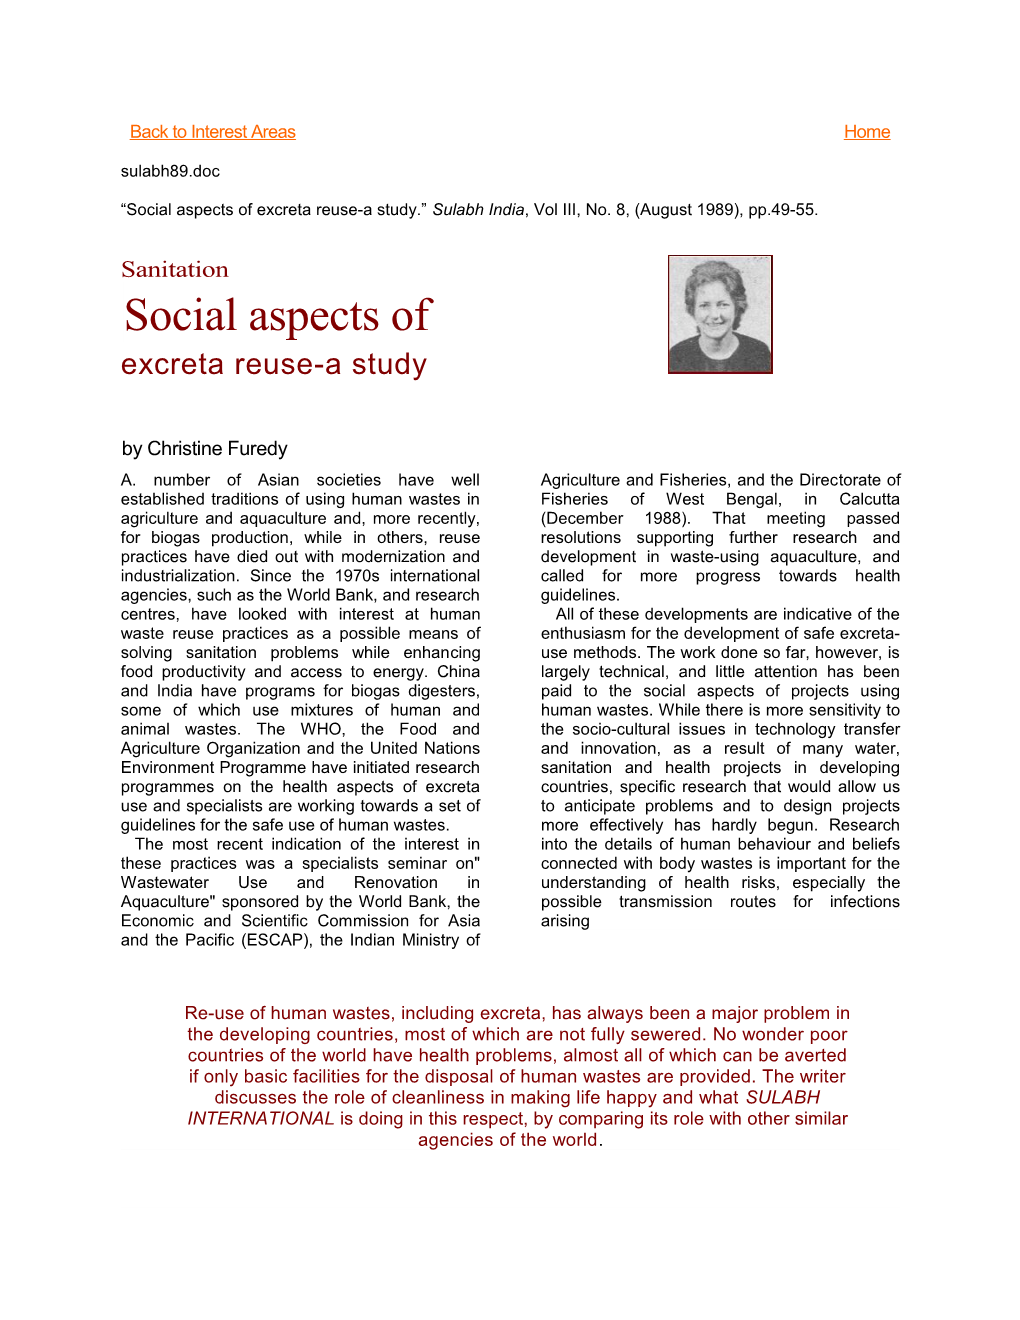 Social Aspects of Excreta Reuse-A Study. Sulabh India, Vol III, No. 8, (August 1989), Pp.49-55